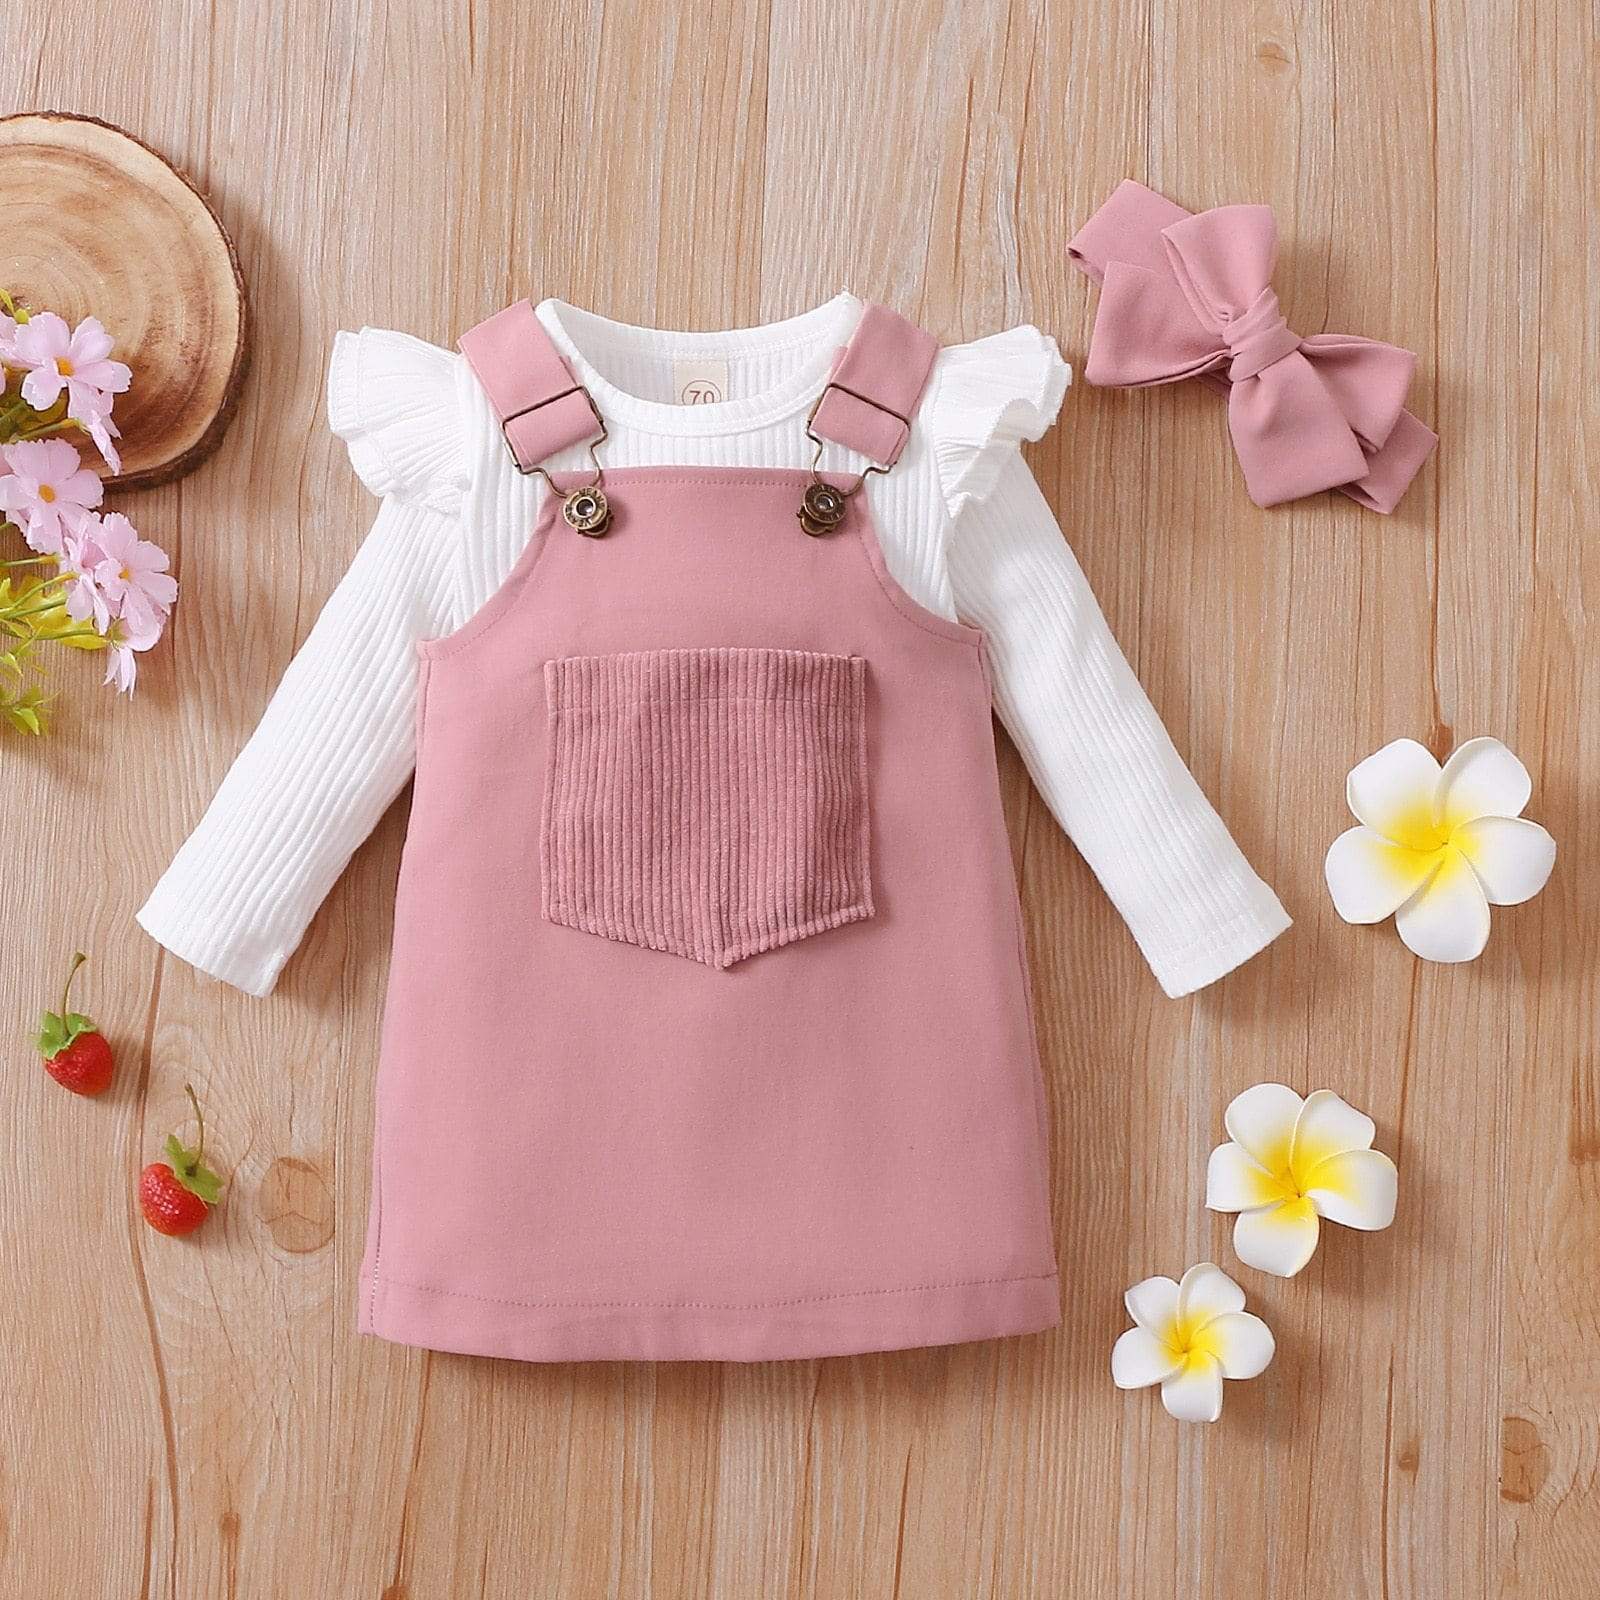 Baby Girl 95% Cotton Denim Shirred Layered Strap Dress Only $12.74 PatPat  US Mobile